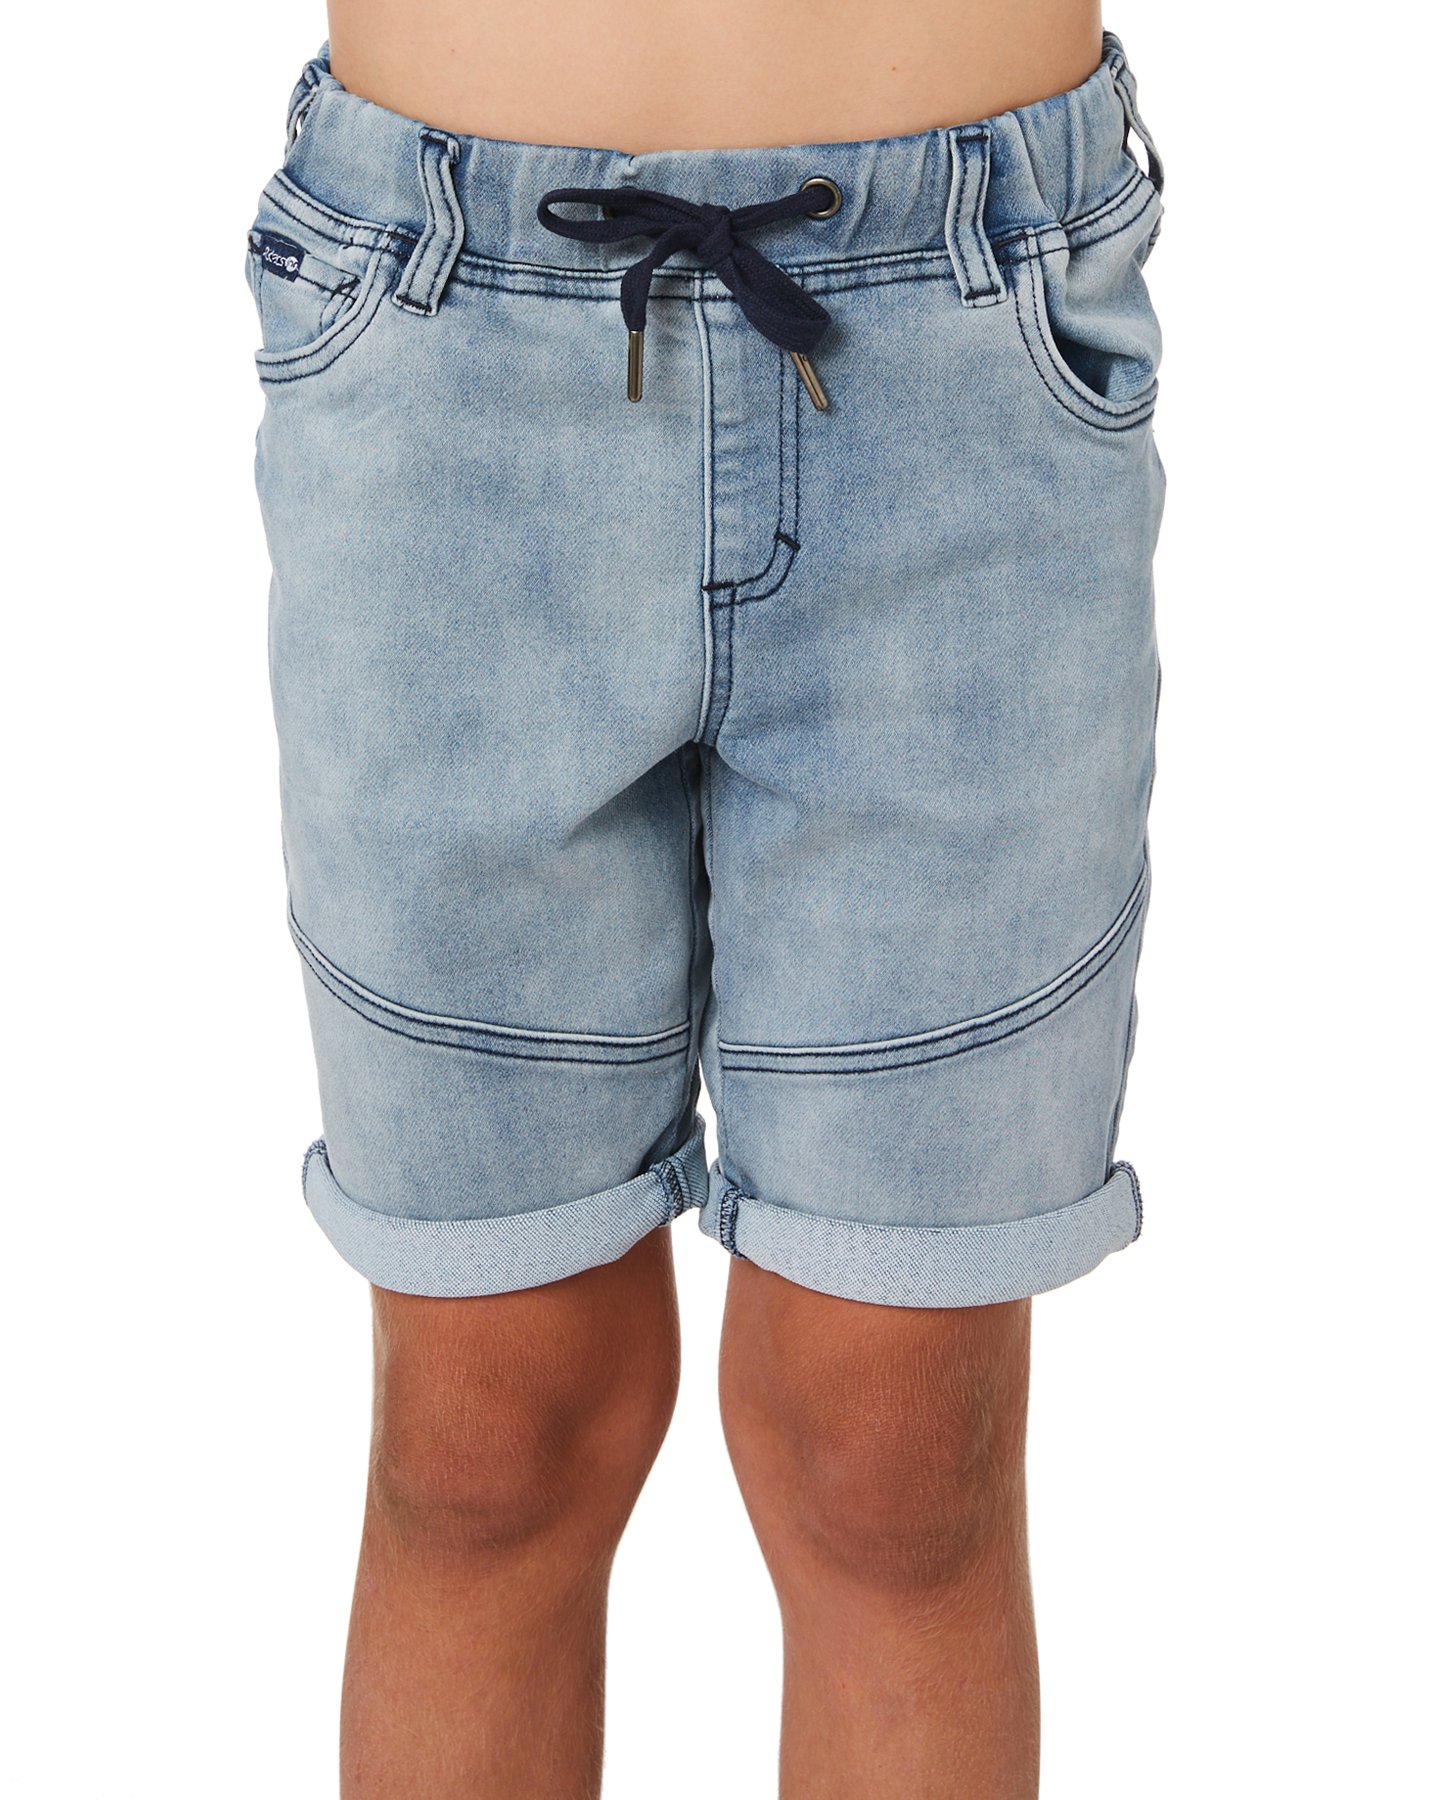 Riders - Denim Jogger Short - Kids-Boys : We stock the very latest in ...